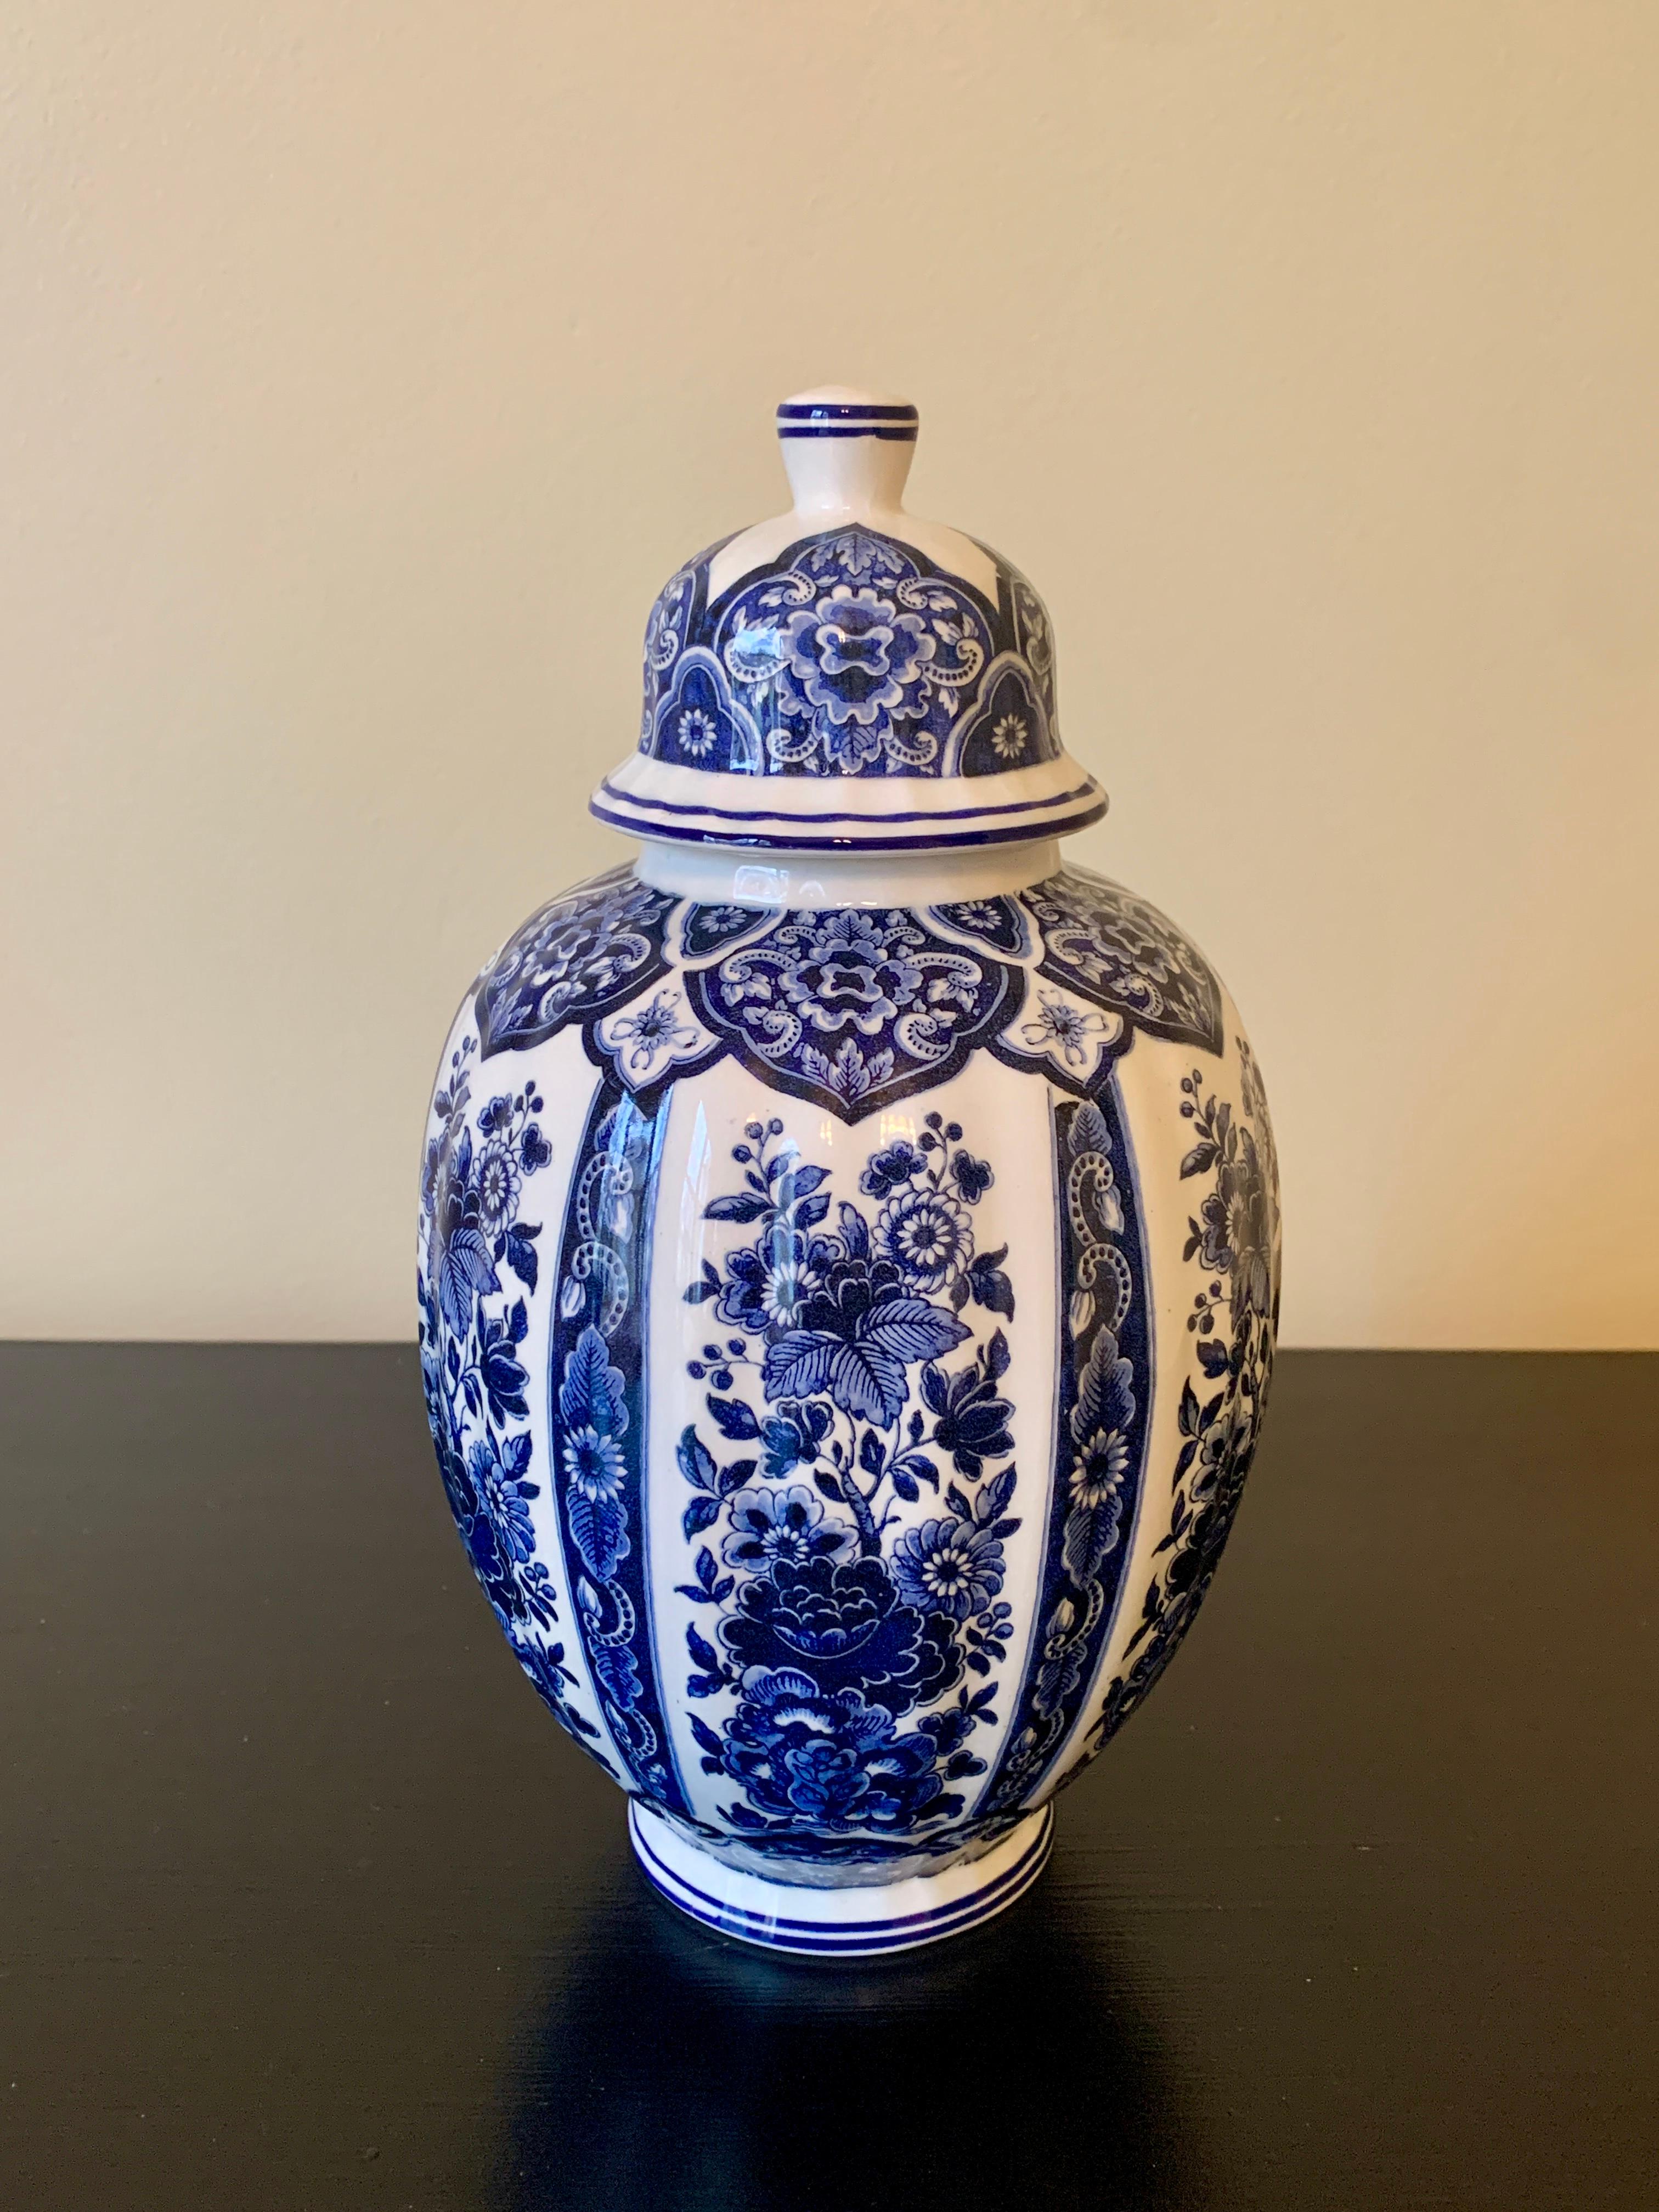 A beautiful Delft Chinoiserie style blue and white porcelain covered ginger jar or temple jar

By Ardalt Blue Delfia

Italy, Mid-20th Century

Measures: 5.25ʺW × 5.25ʺD × 9.5ʺH.

Very good vintage condition.